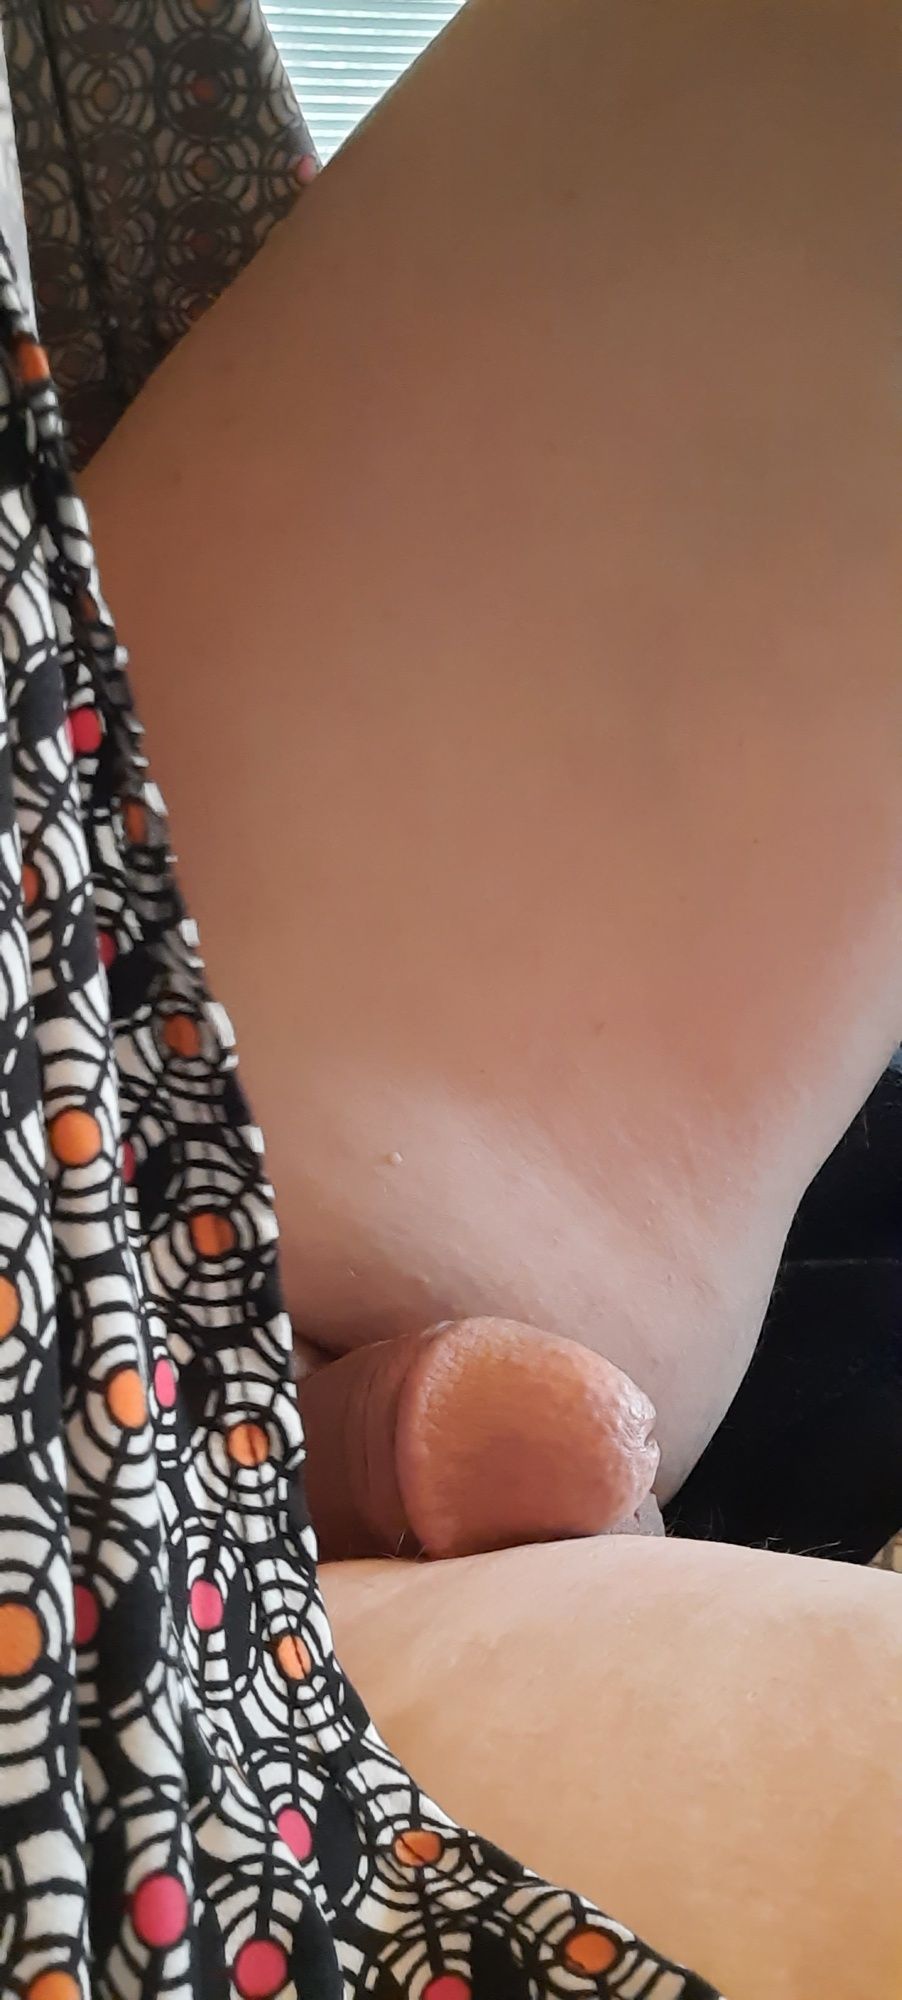 My small cock in panties 